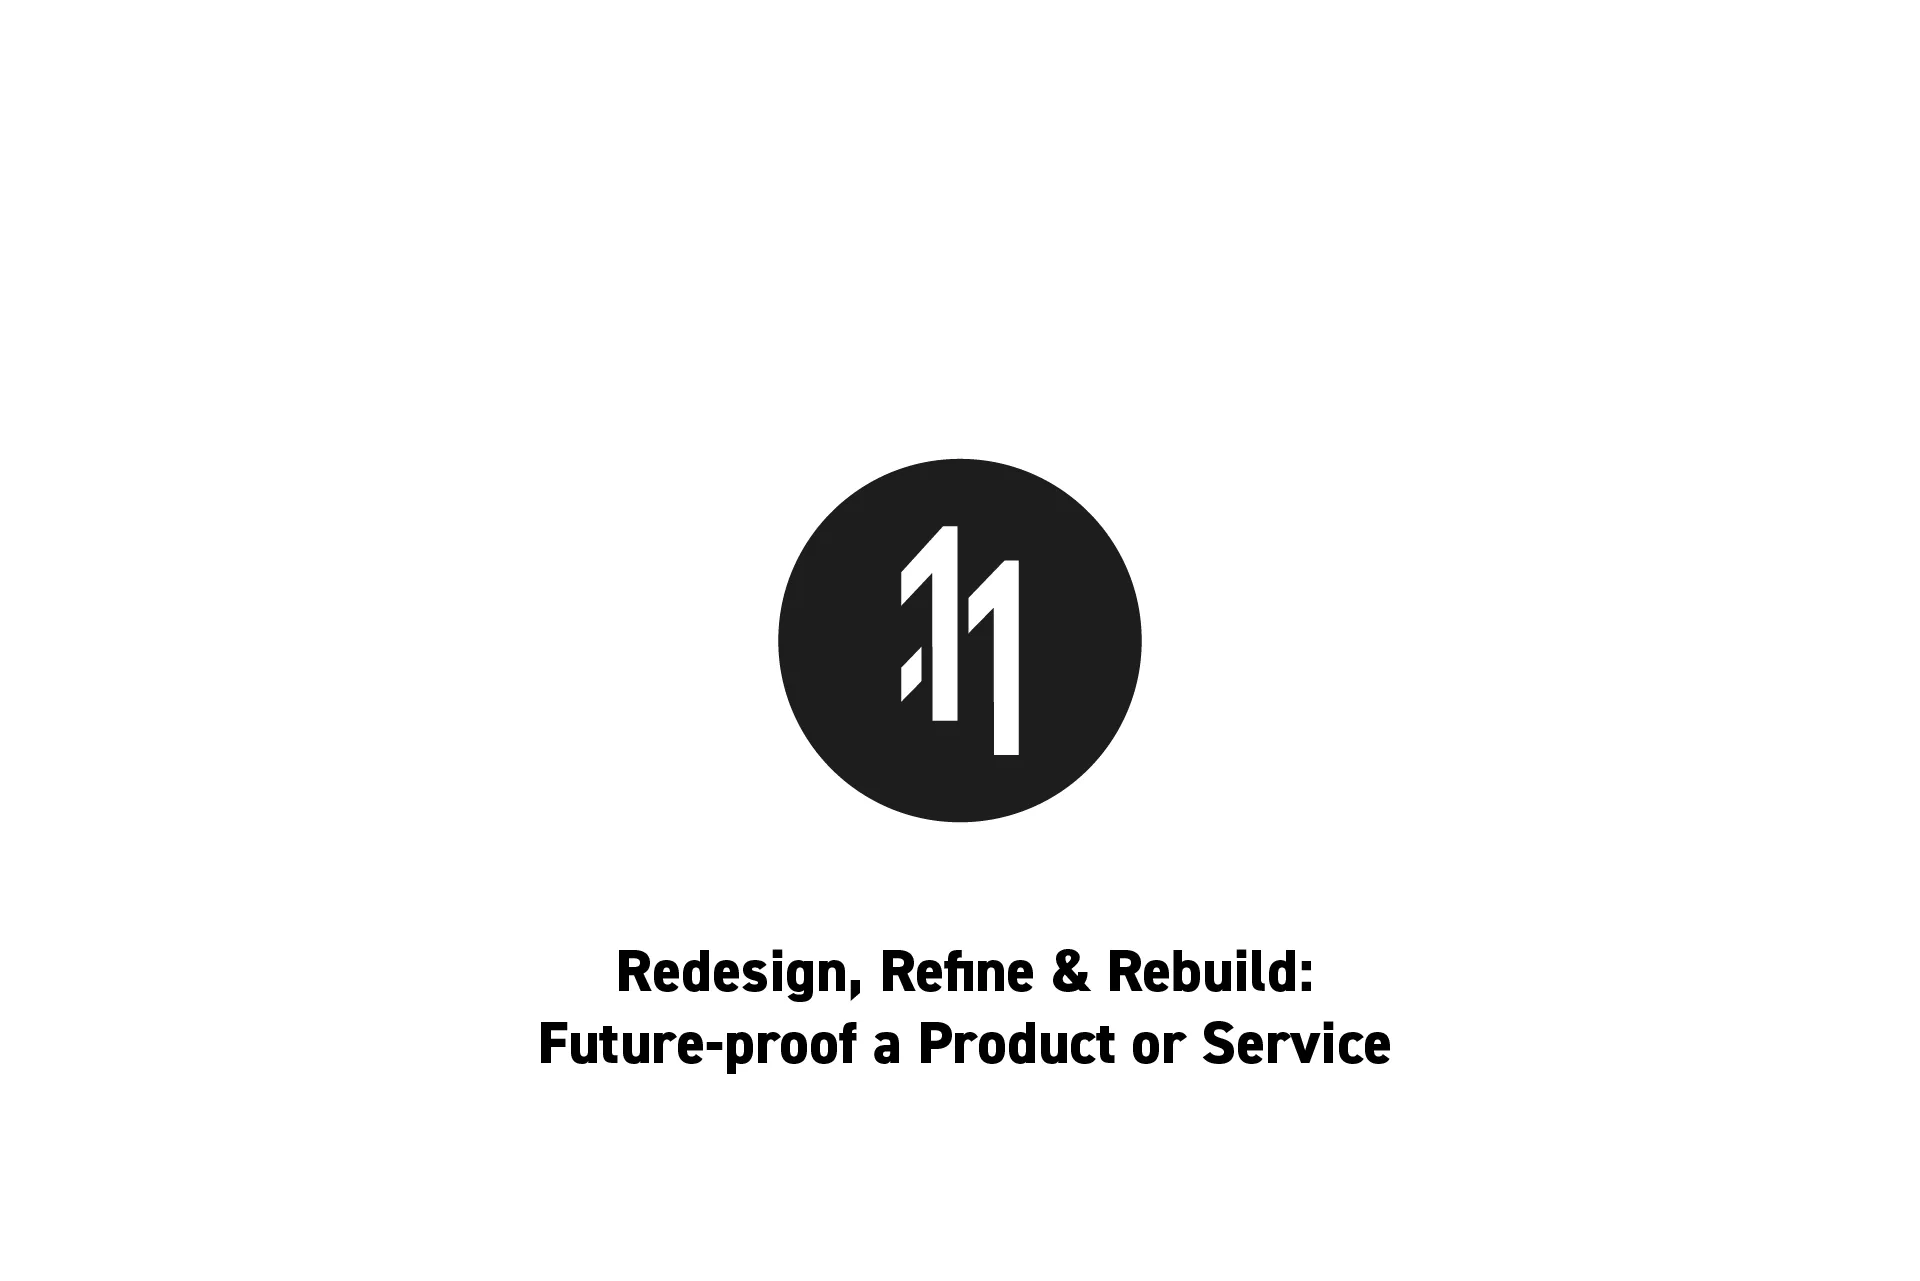 <p>The delasign logo with the text "Redesign, Refine &amp; Rebuild: Future-proof a Product or Service" beneath it.</p>